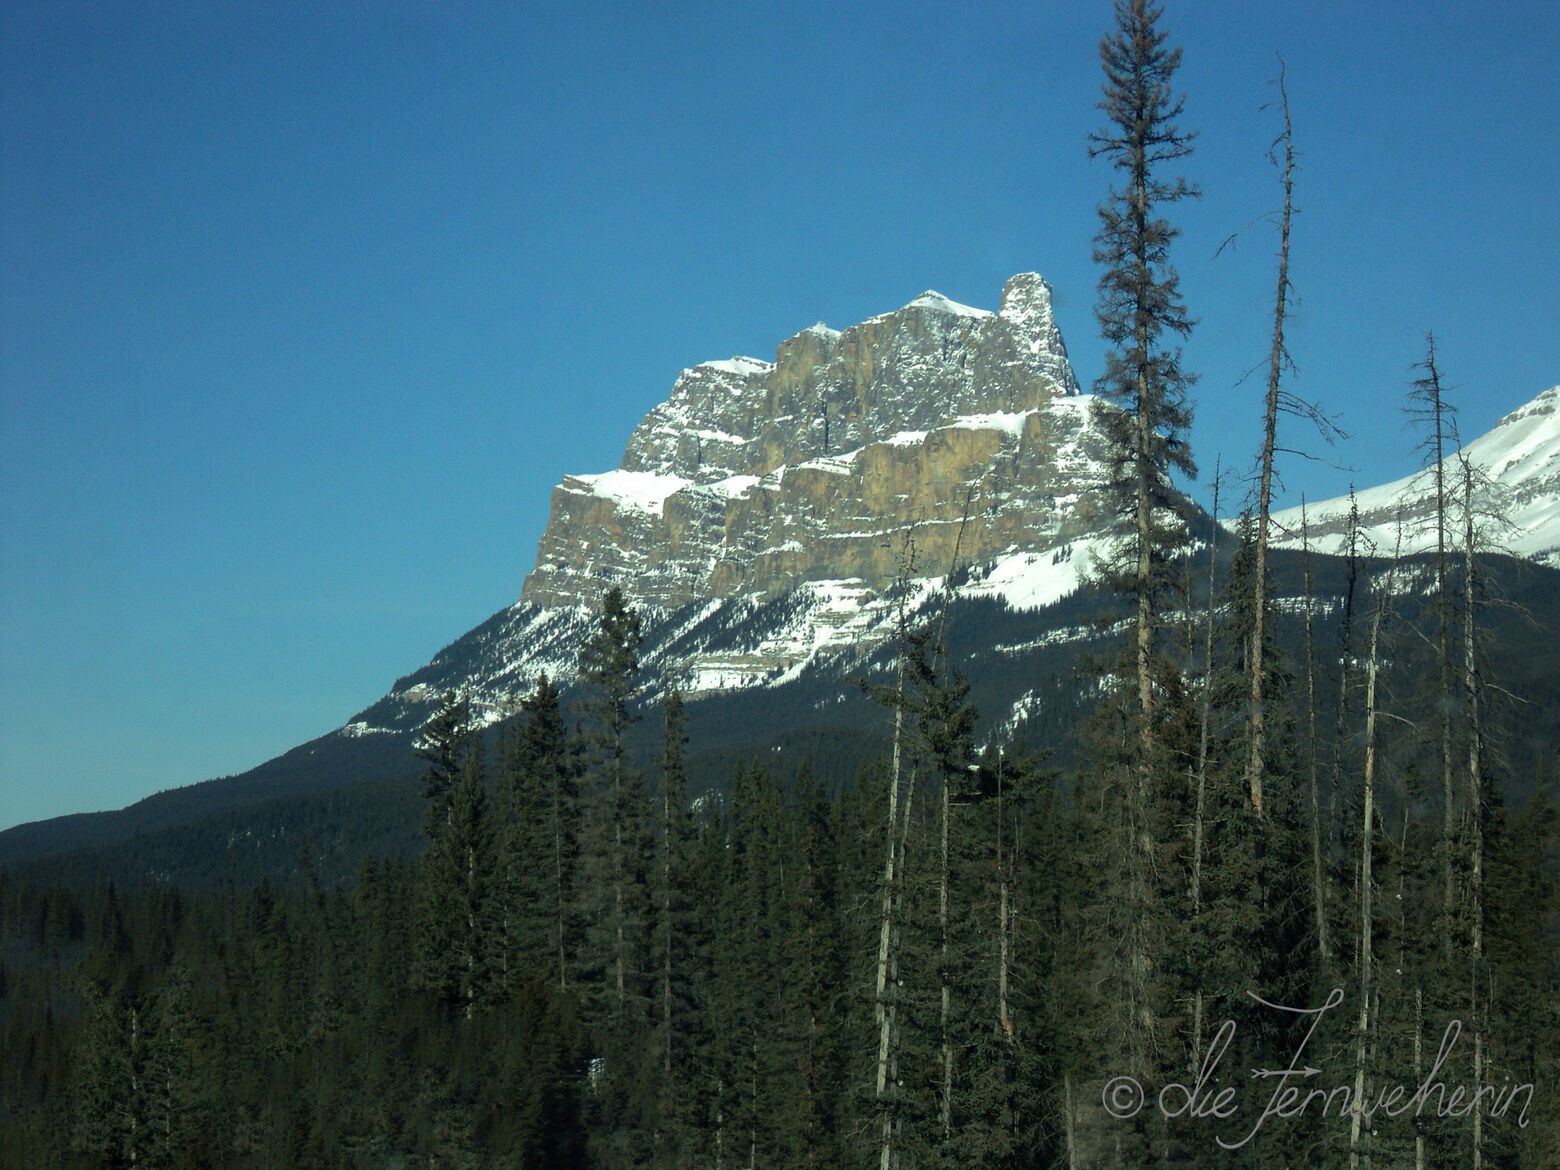 Castle Mountain in Banff National Park, as seen from the Bow Valley Parkway.